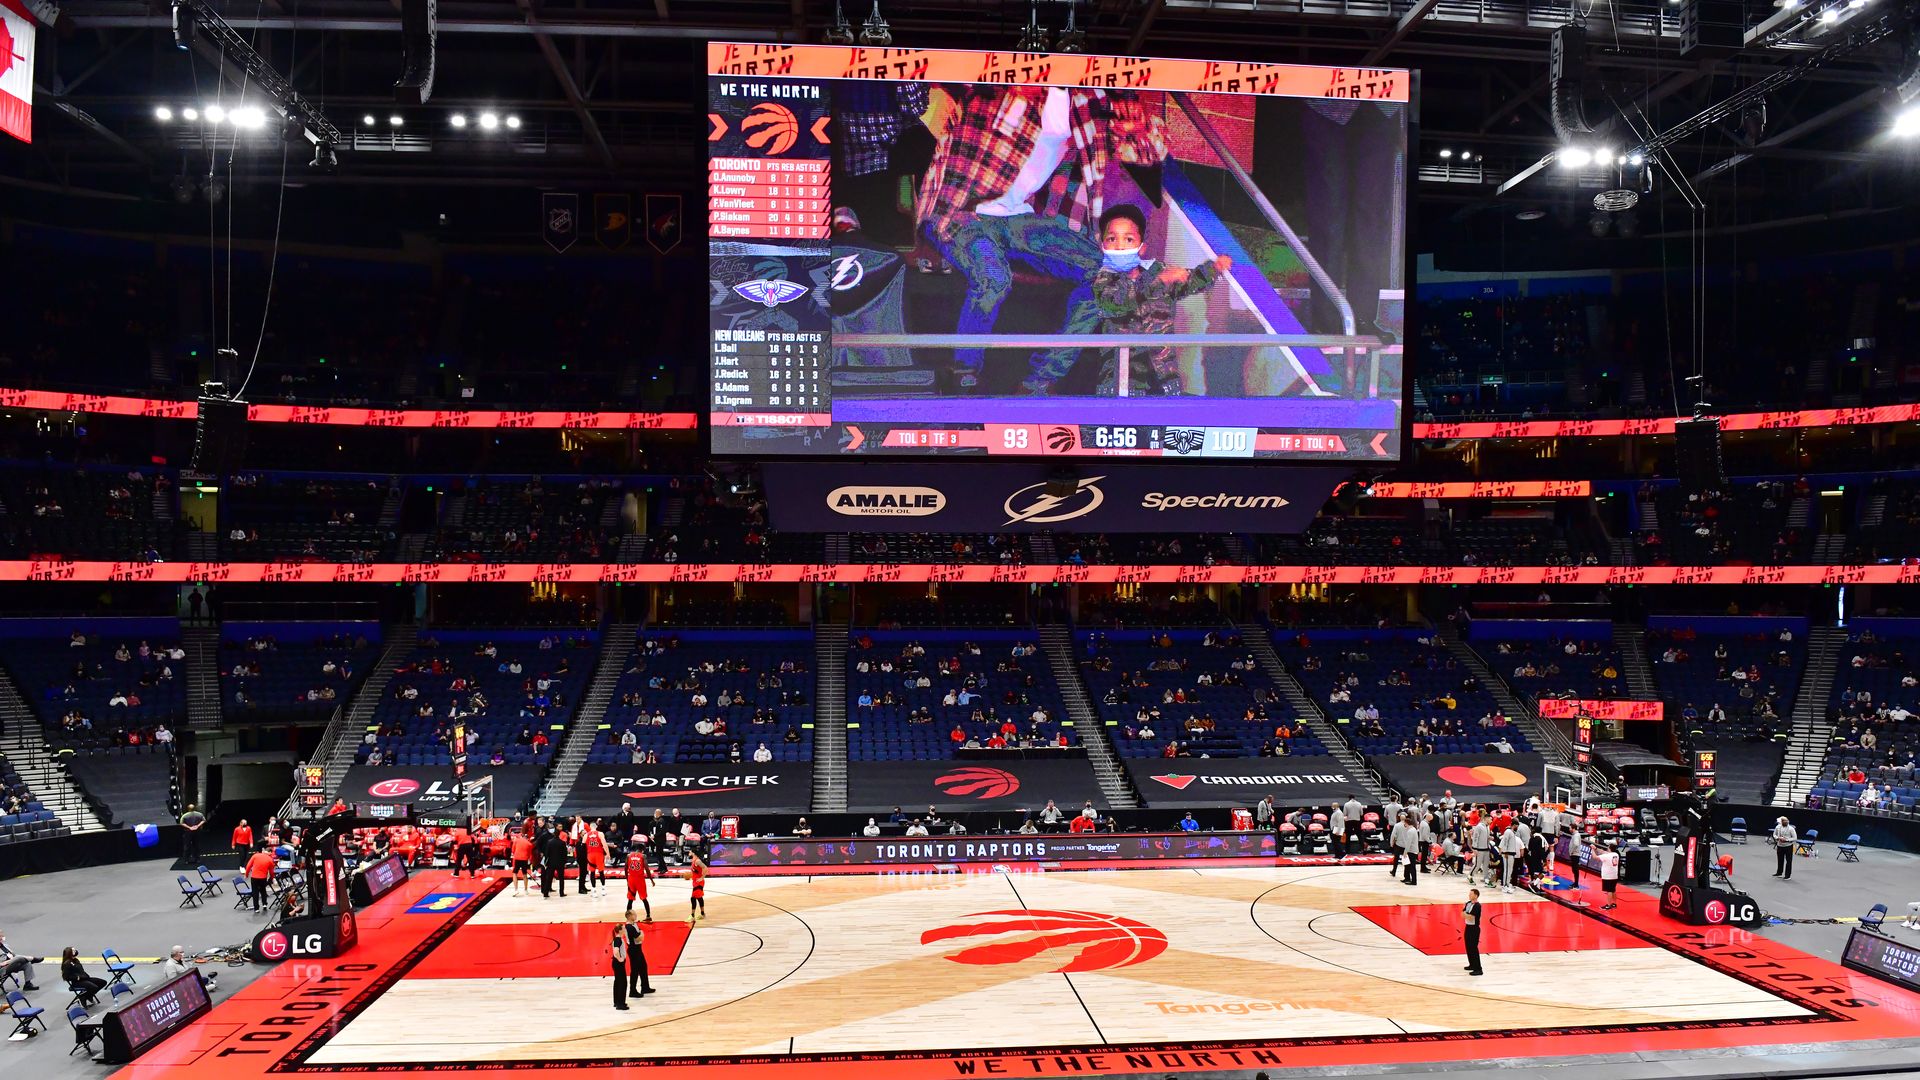 NBA Arenas Oldest to Newest: 2020 Update - Arena Digest